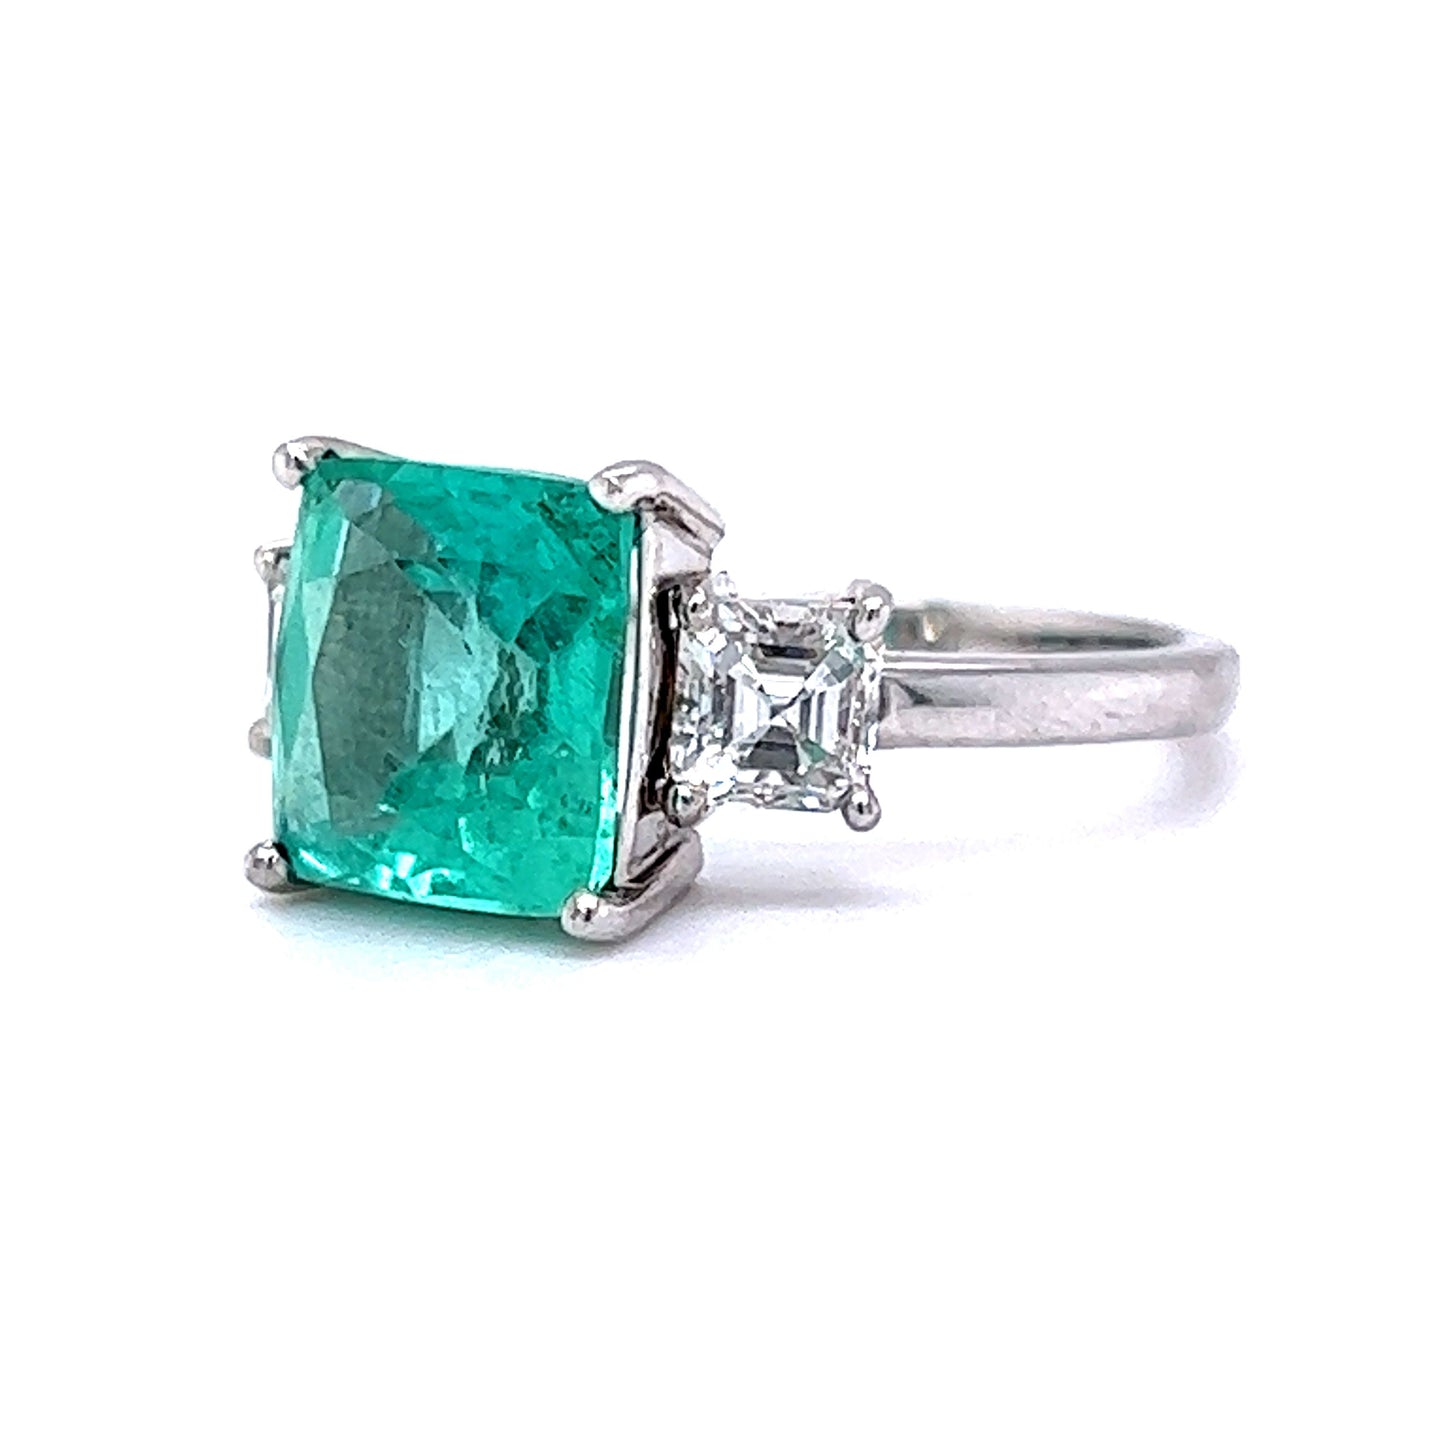 Emerald Cocktail Ring in 18k White Gold